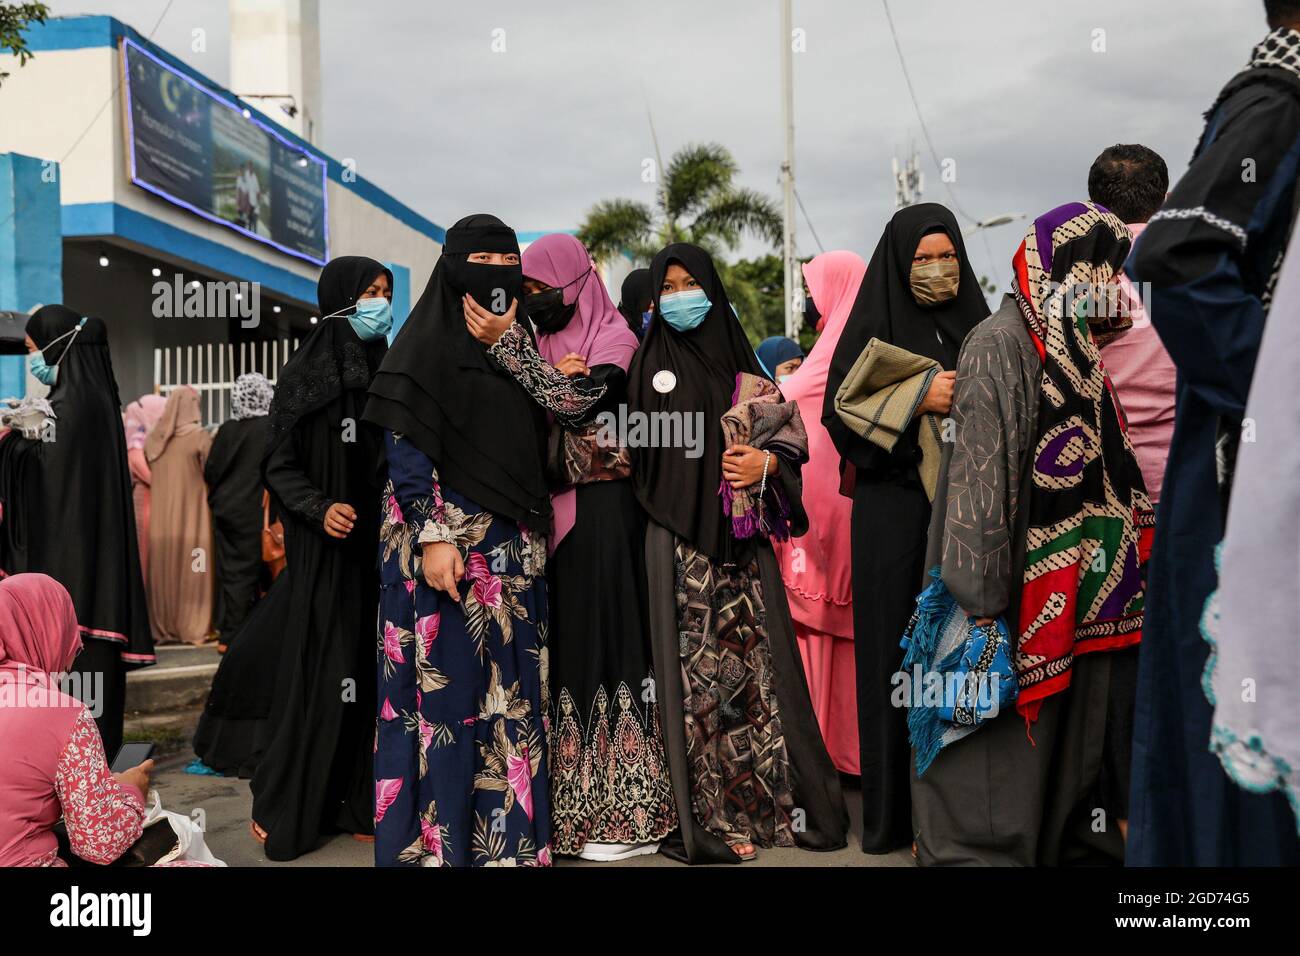 Filipino Muslims wearing protective masks as precaution against the spread of the coronavirus disease attend morning prayers to mark Eid al-Adha at the Blue Mosque in Taguig City, Metro Manila. Despite new waves of coronavirus cases and governments banning large gatherings, Muslims around the world celebrate Eid al-Adha, or the Feast of the Sacrifice, with prayers and the slaughter of goats and cows and their meat being given to the poor. Philippines. Stock Photo